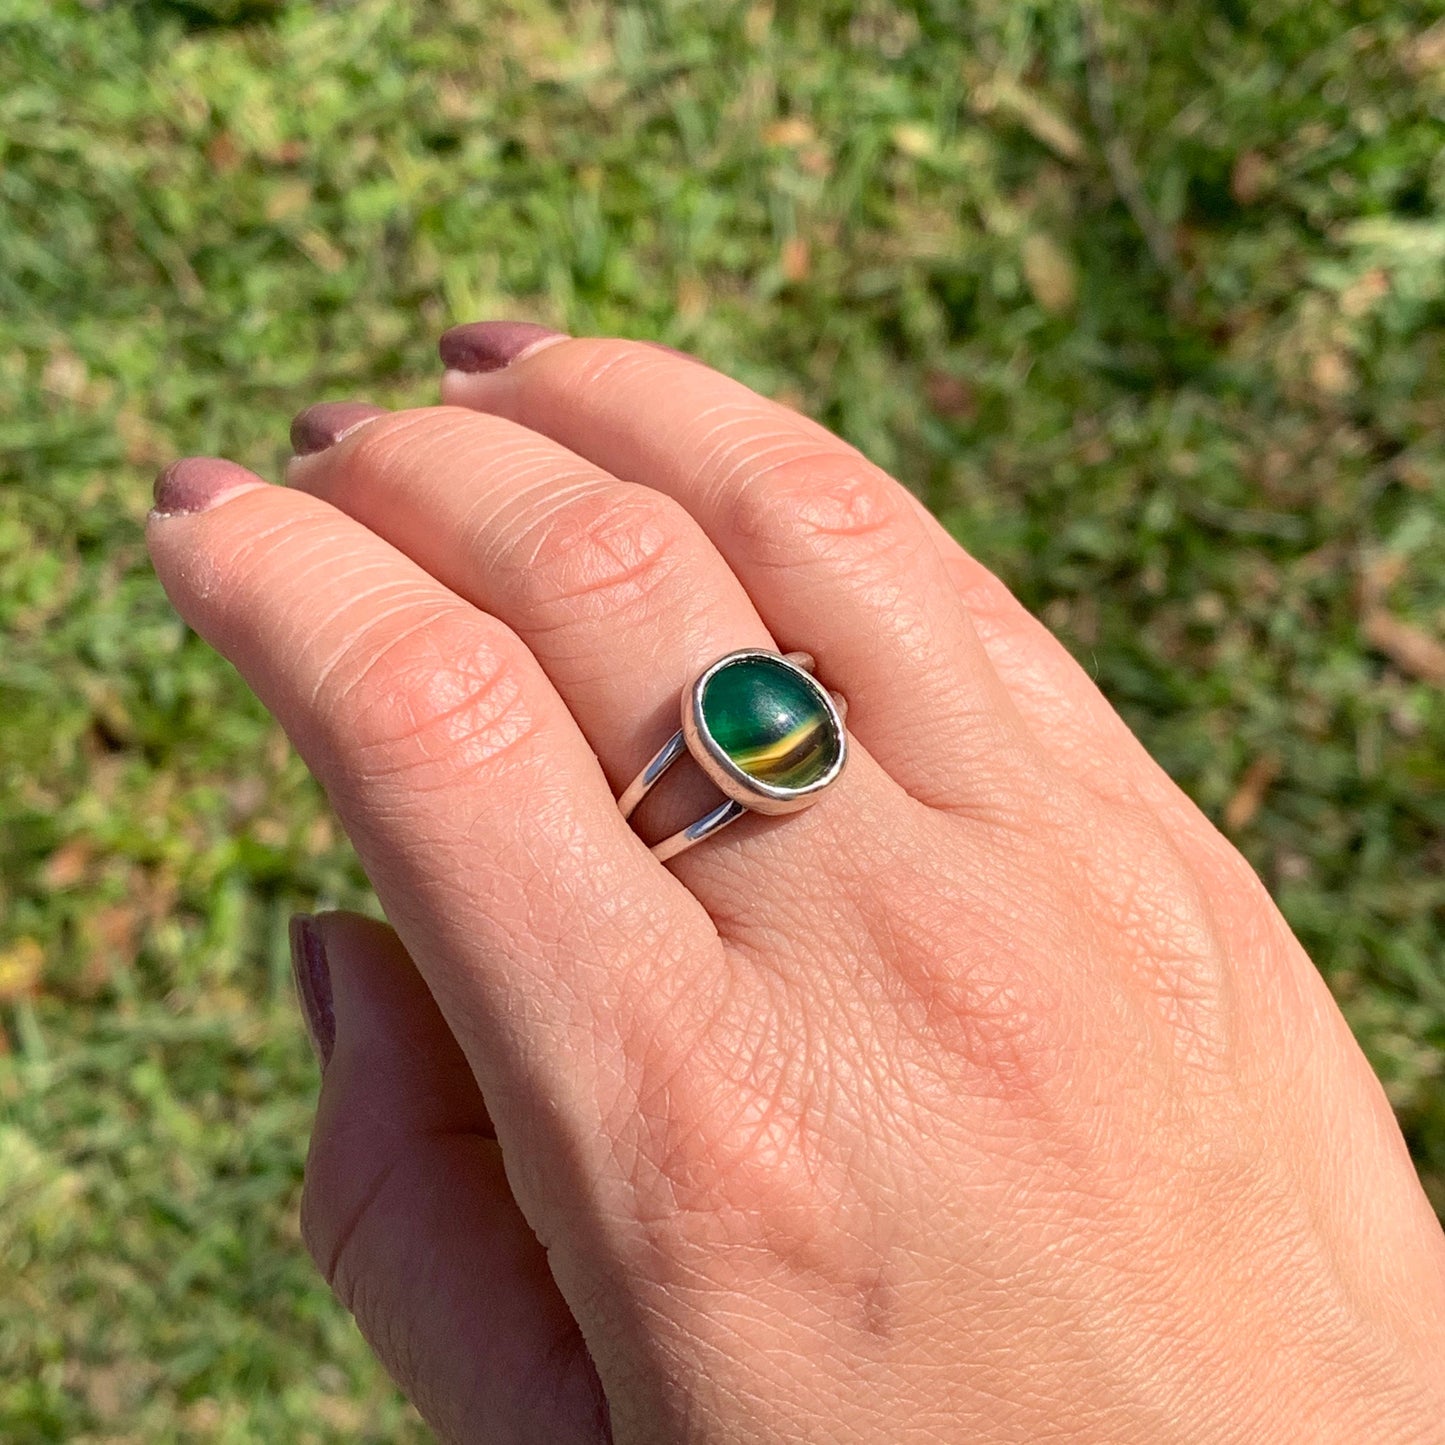 Vintage Silver Agate Ring | Green Banded Agate | US Size 8 Ring